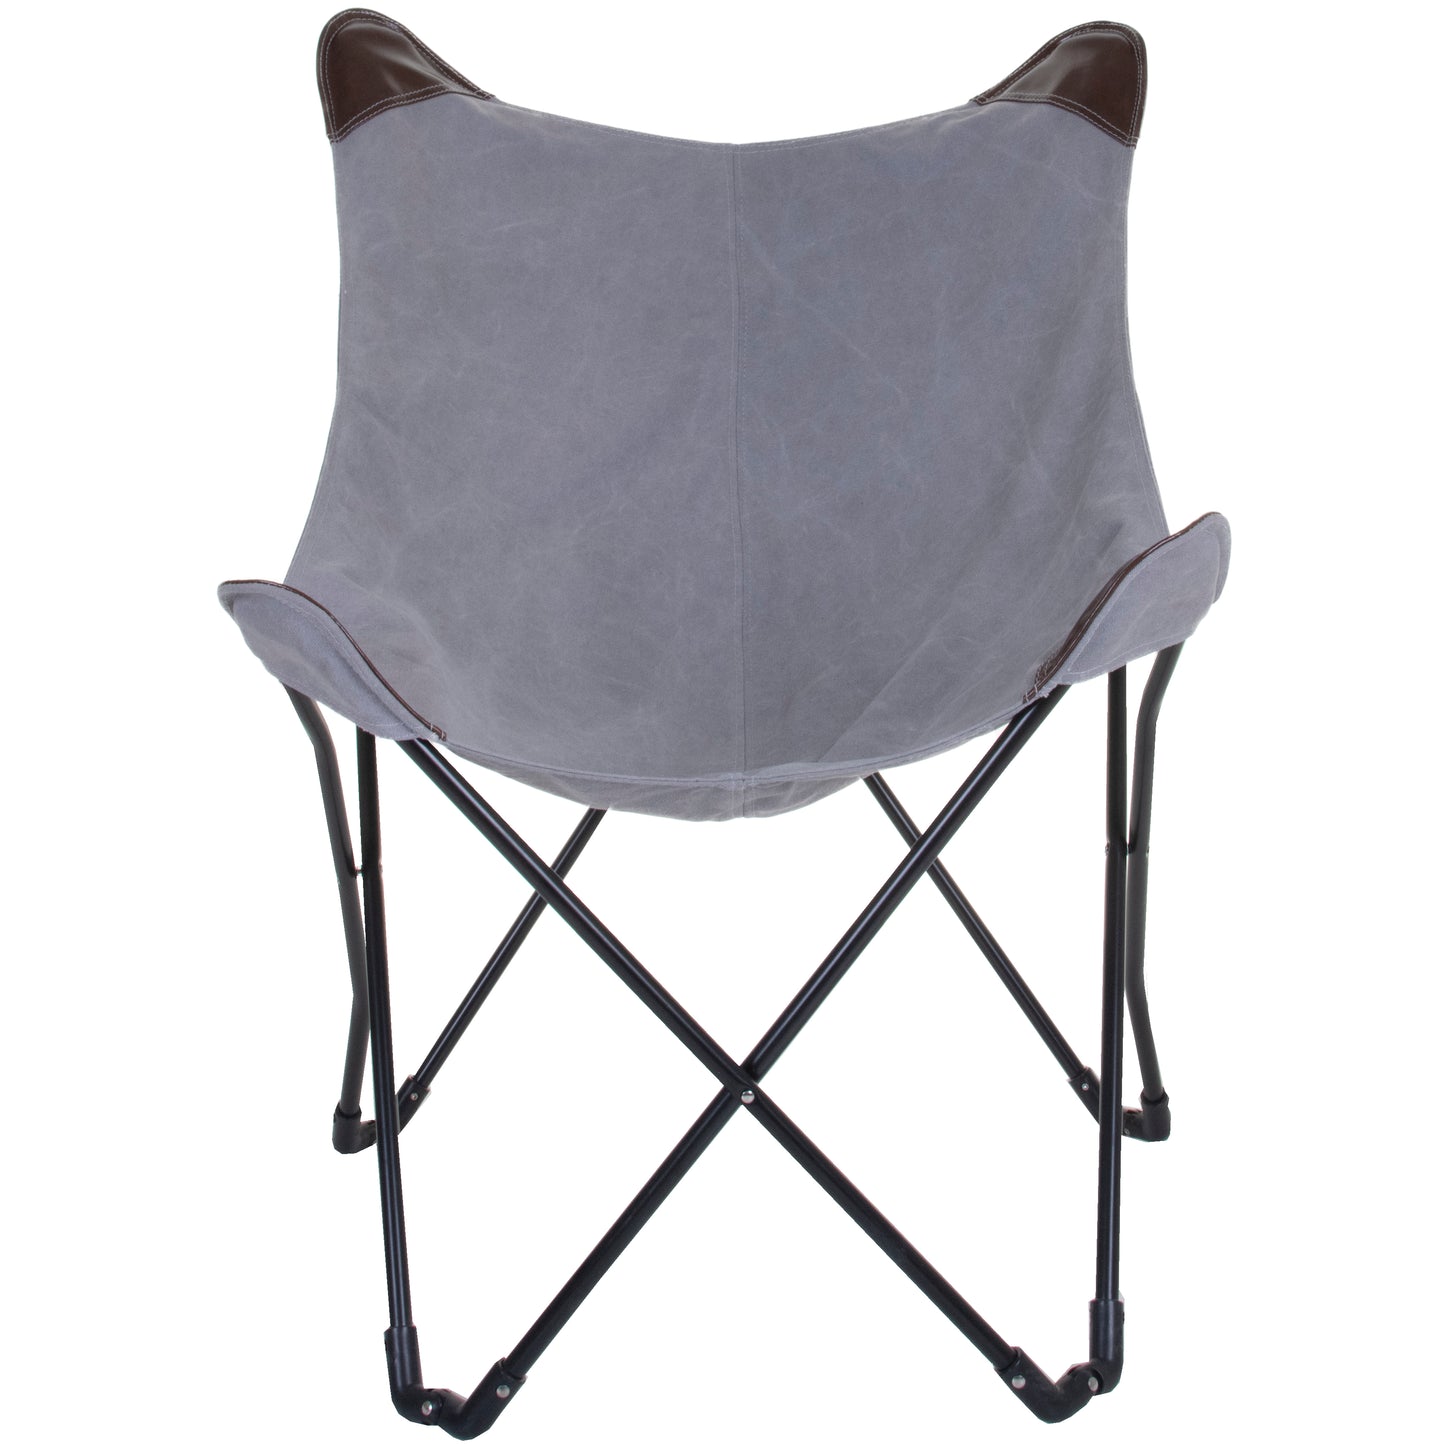 Canvas Swing Chair